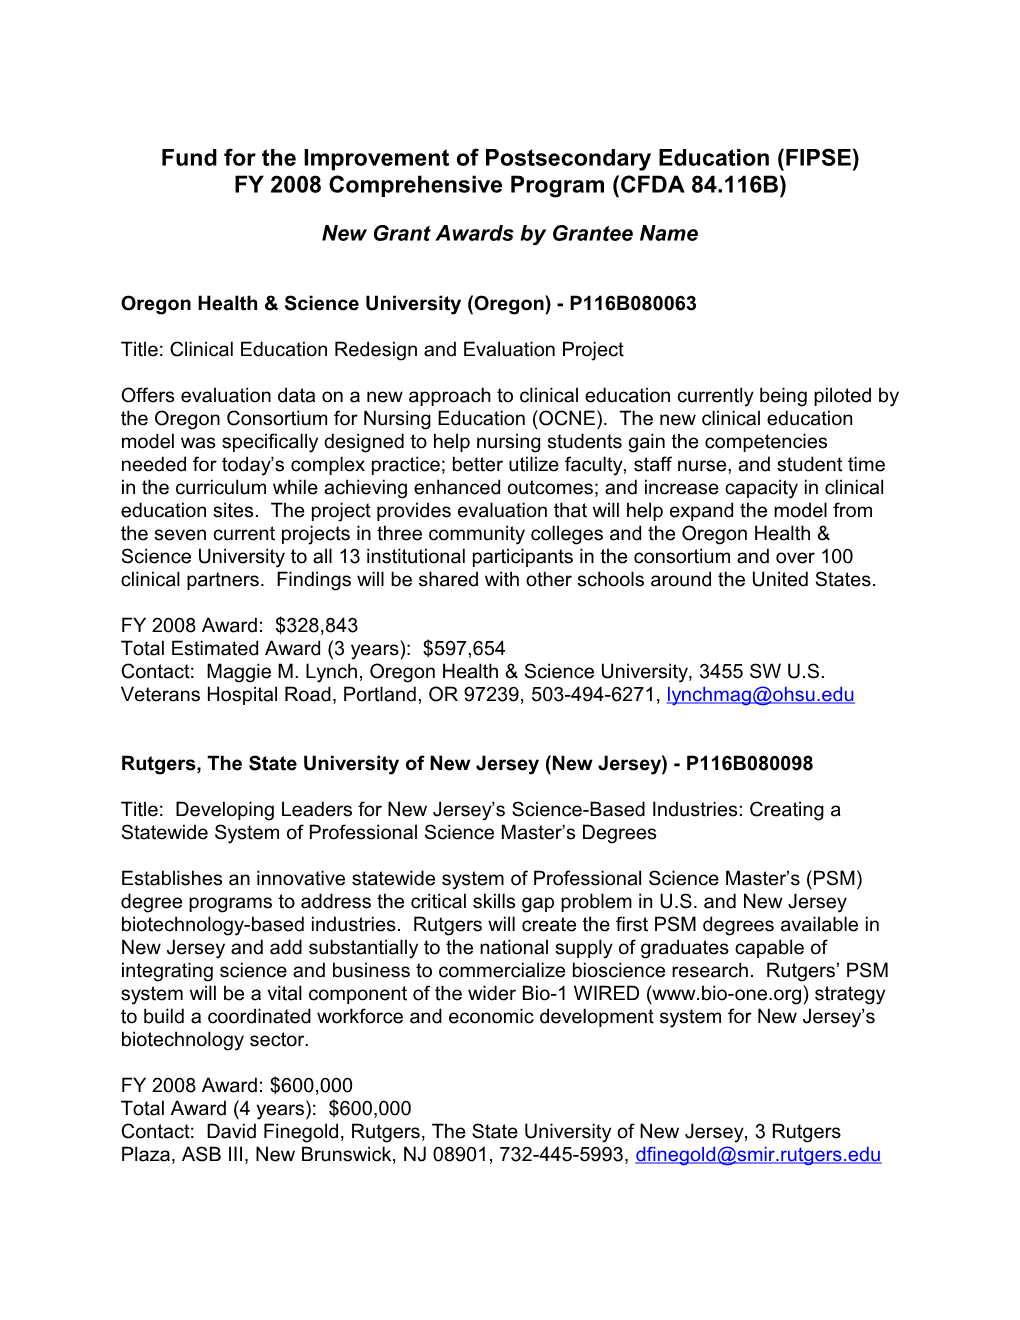 FIPSE Comprehensive Program 2008 Project Abstracts (MS Word)